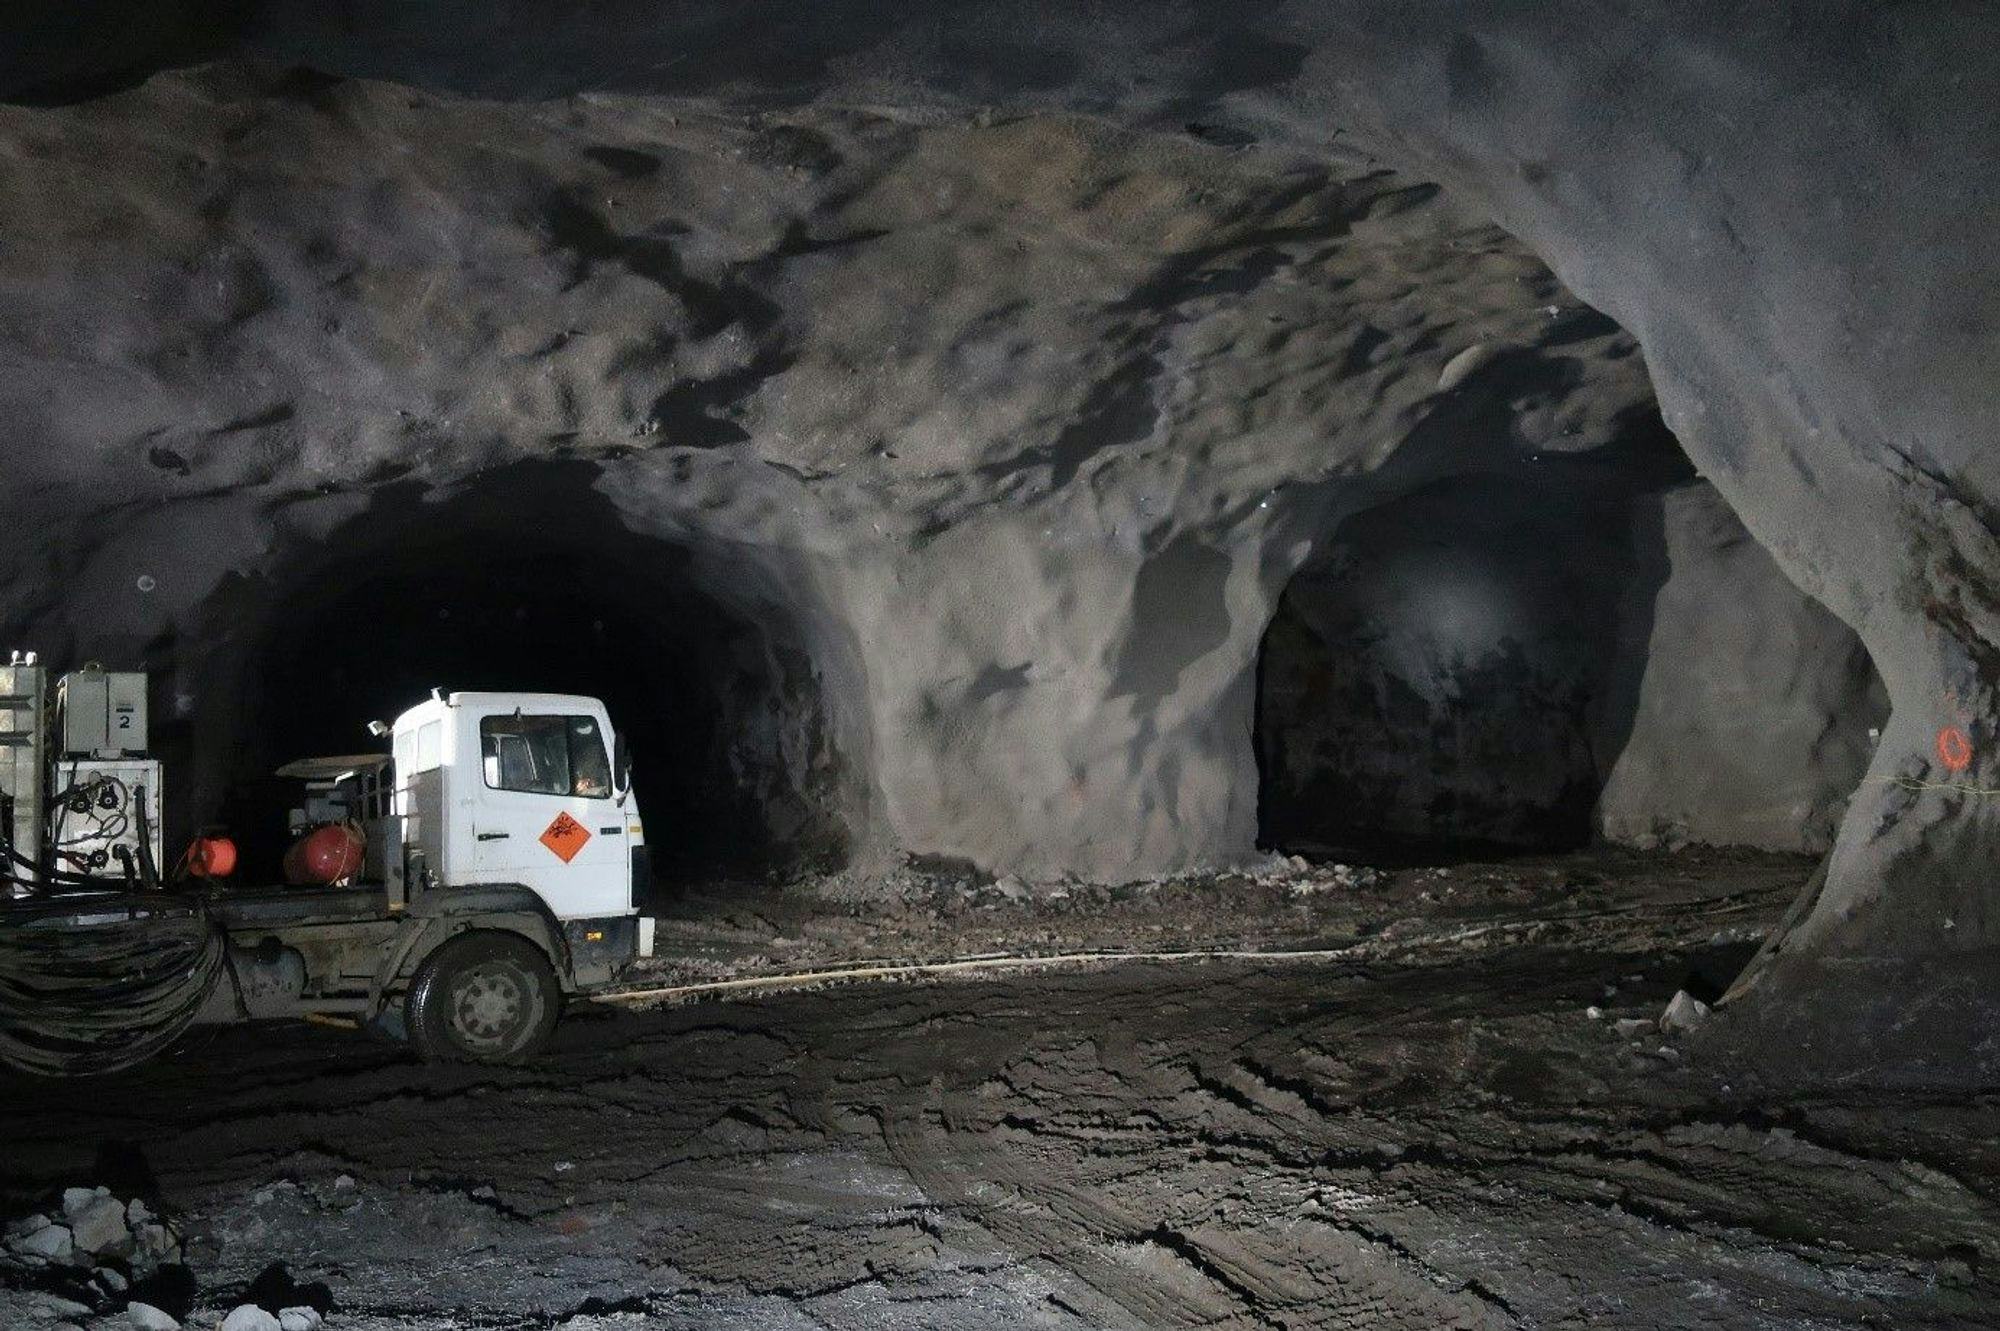 A white truck inside a large illuminated tunnel